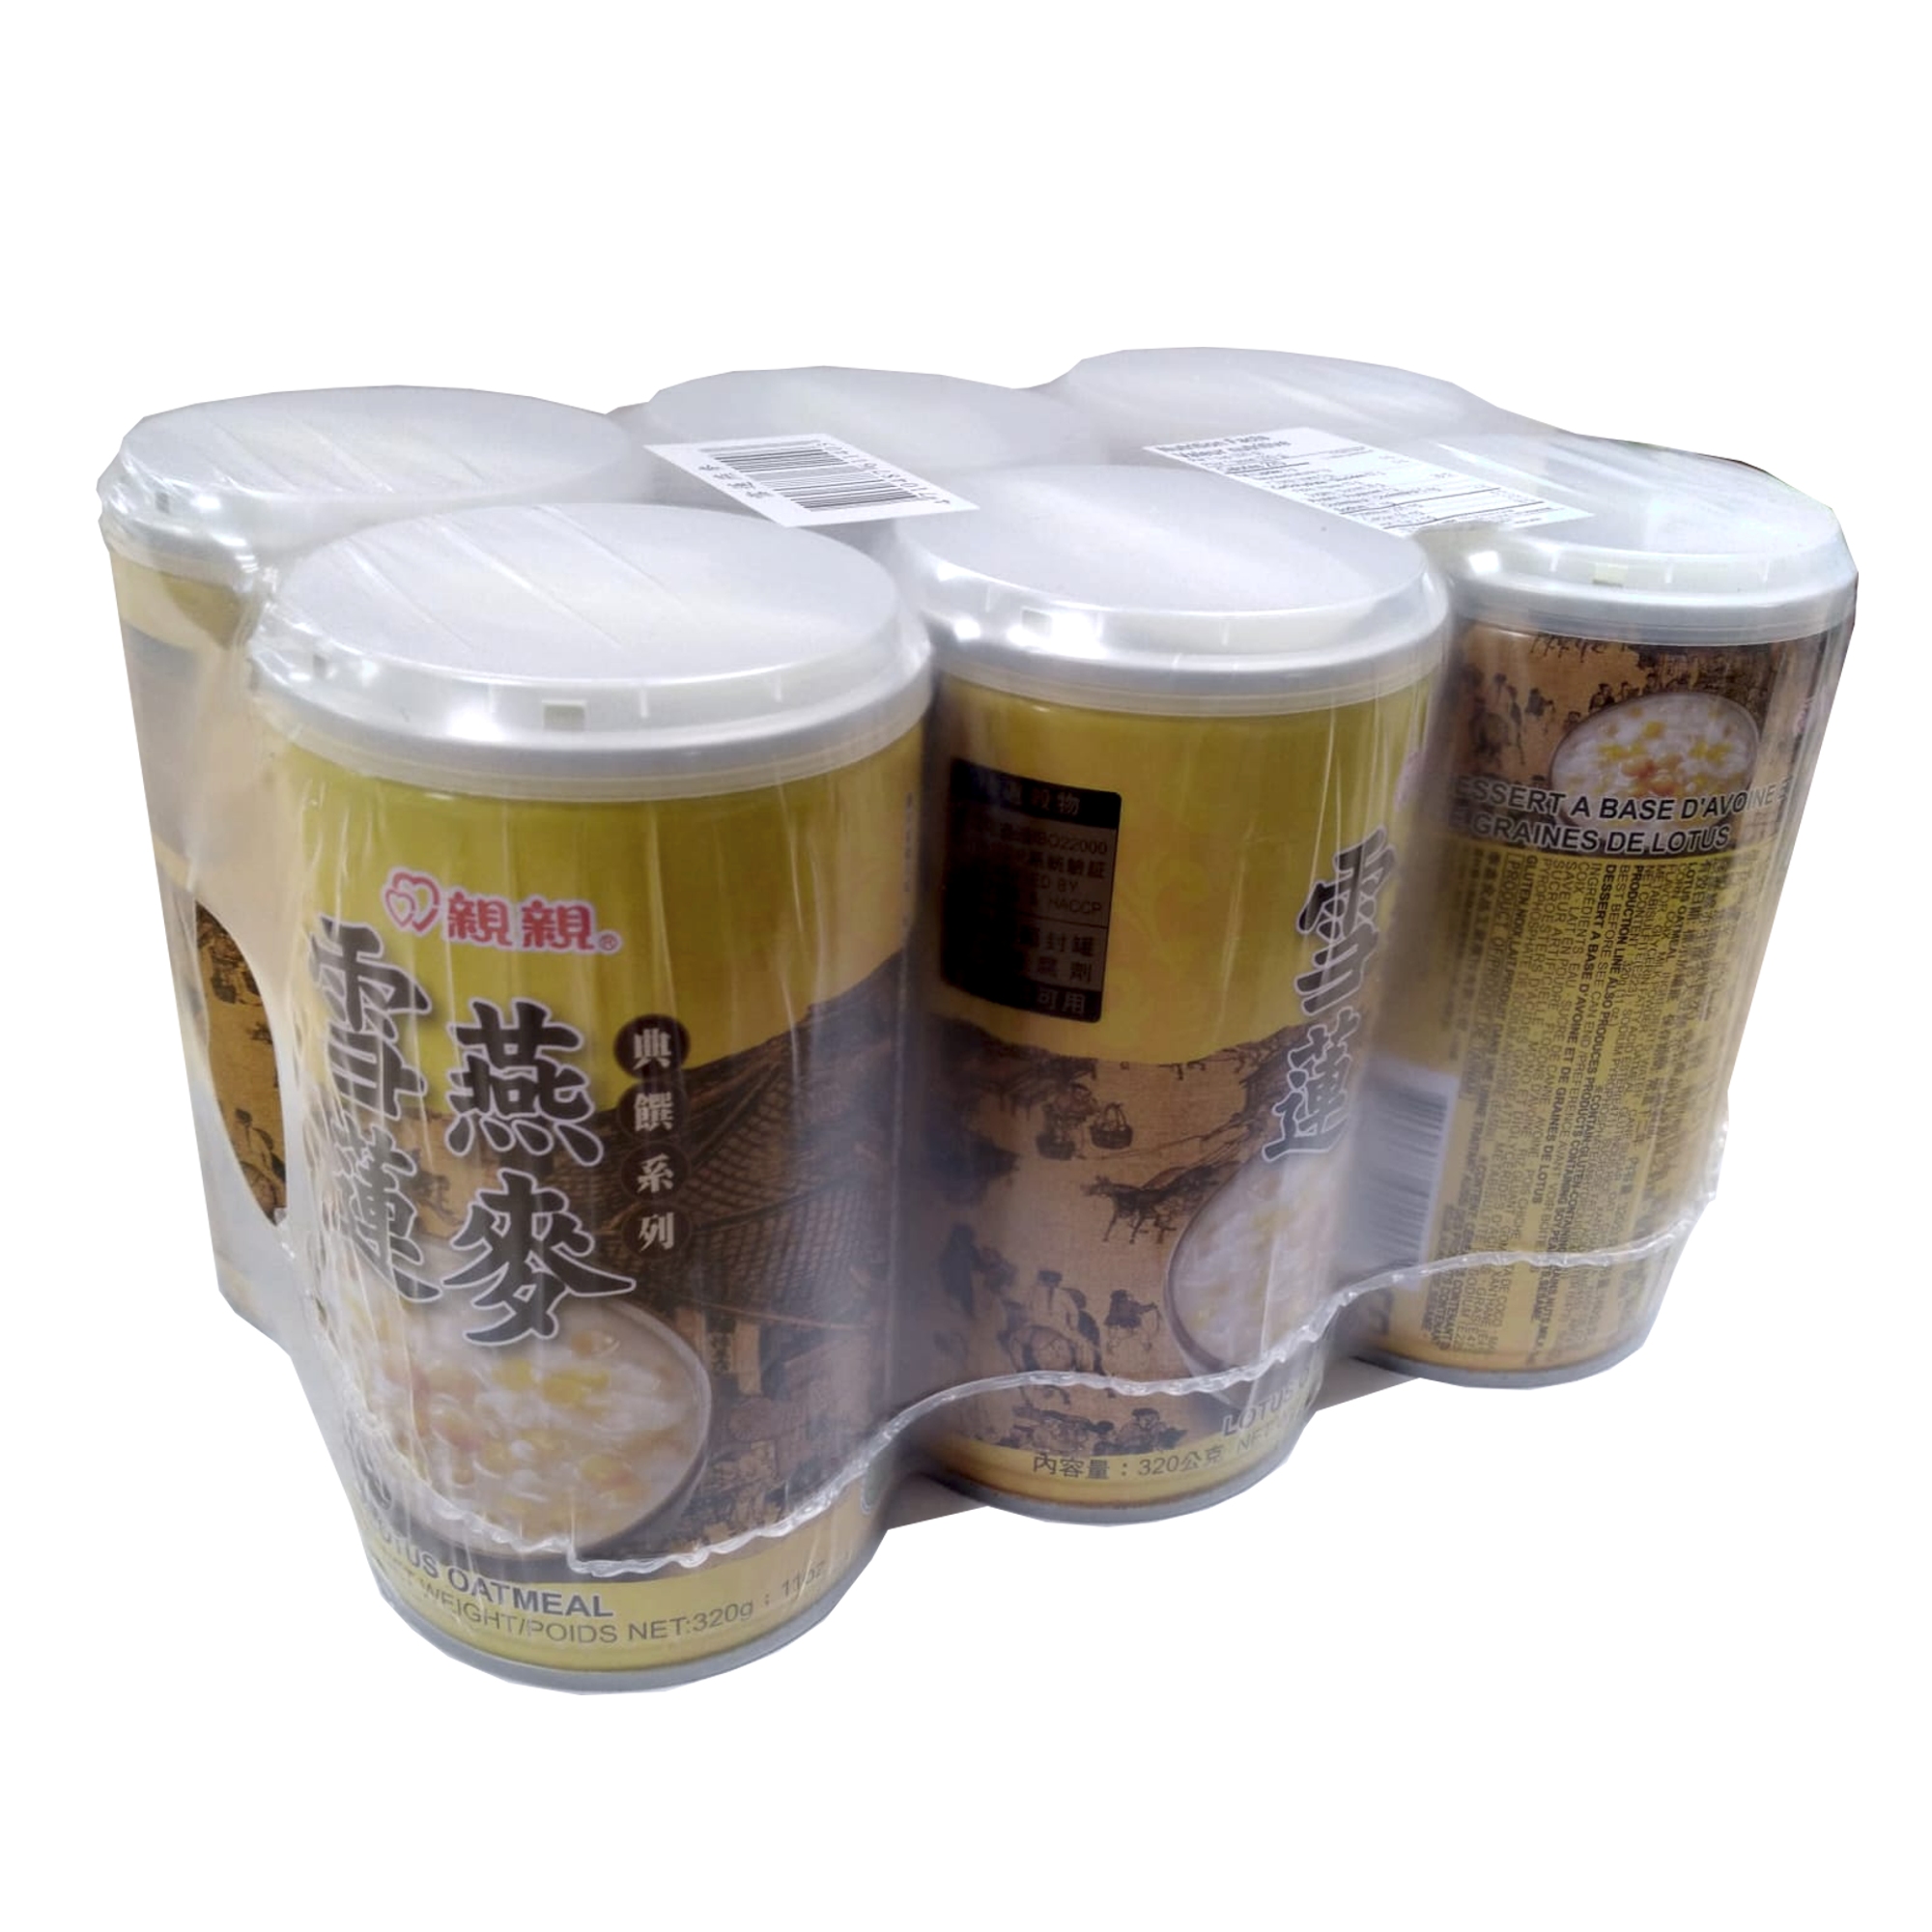 CC 6-CAN LOTUS OATMEAL DRINK DR110021